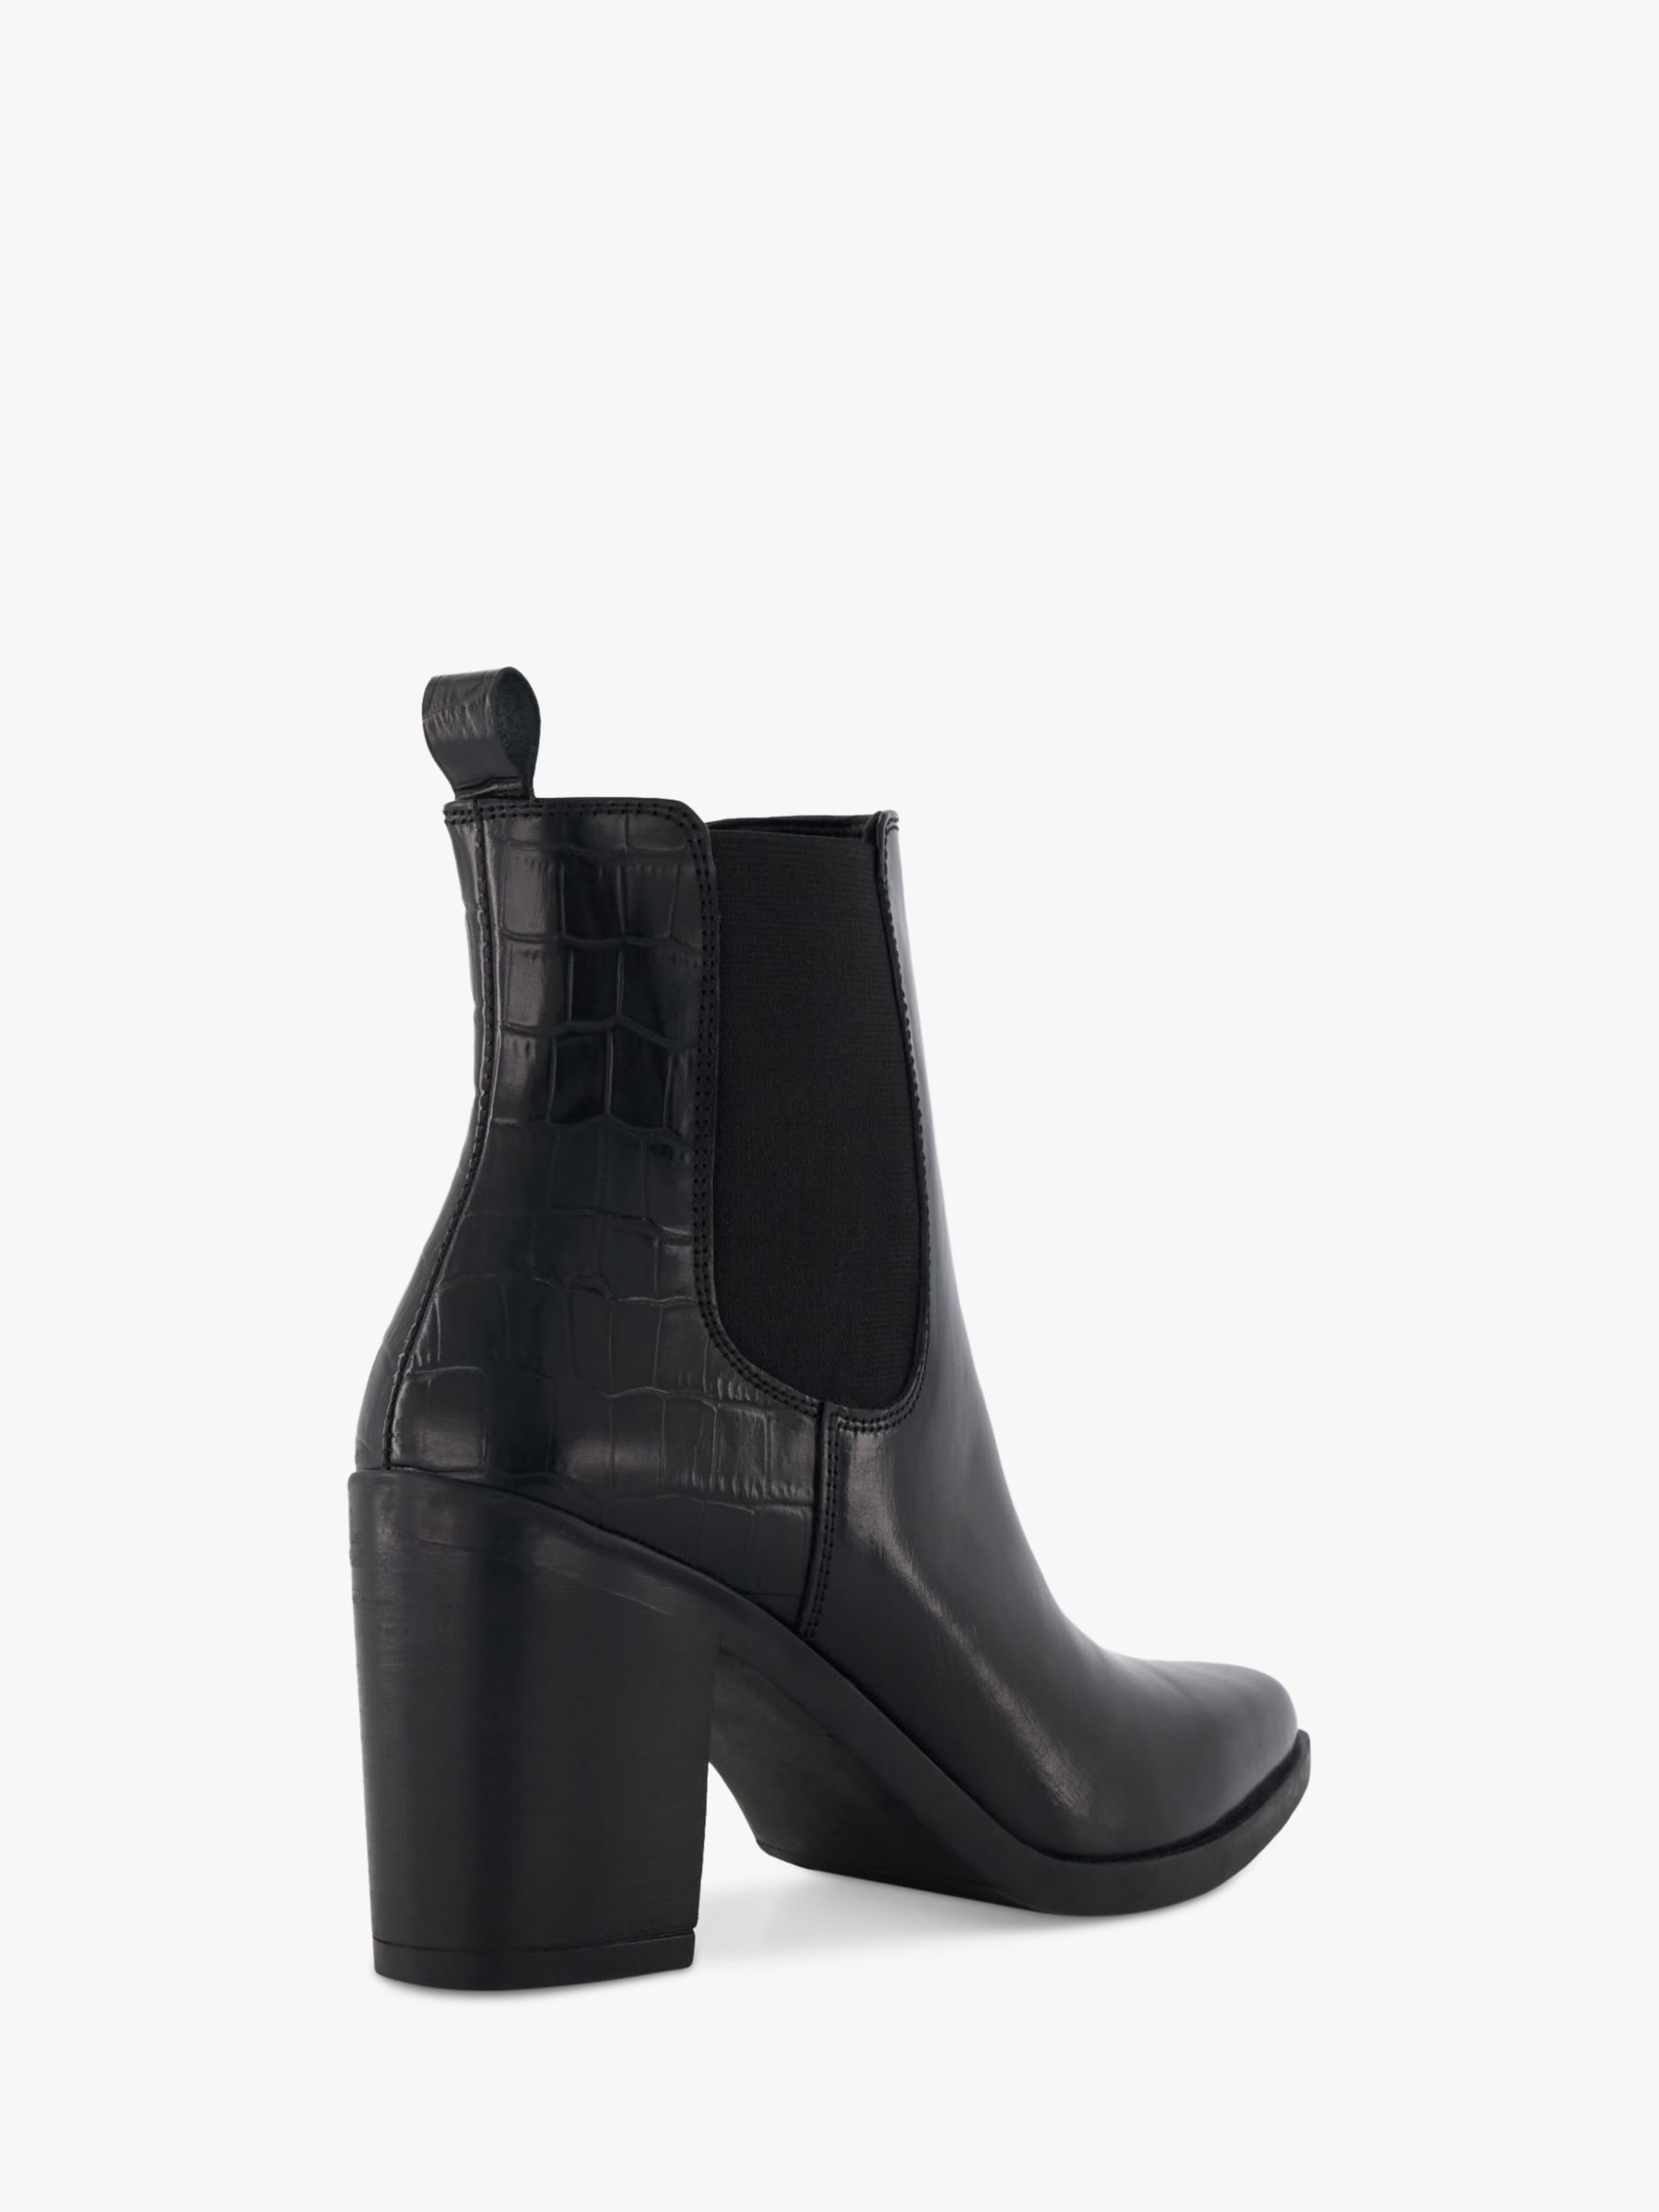 Dune Promising Block Heel Leather Ankle Boots, Black at John Lewis ...